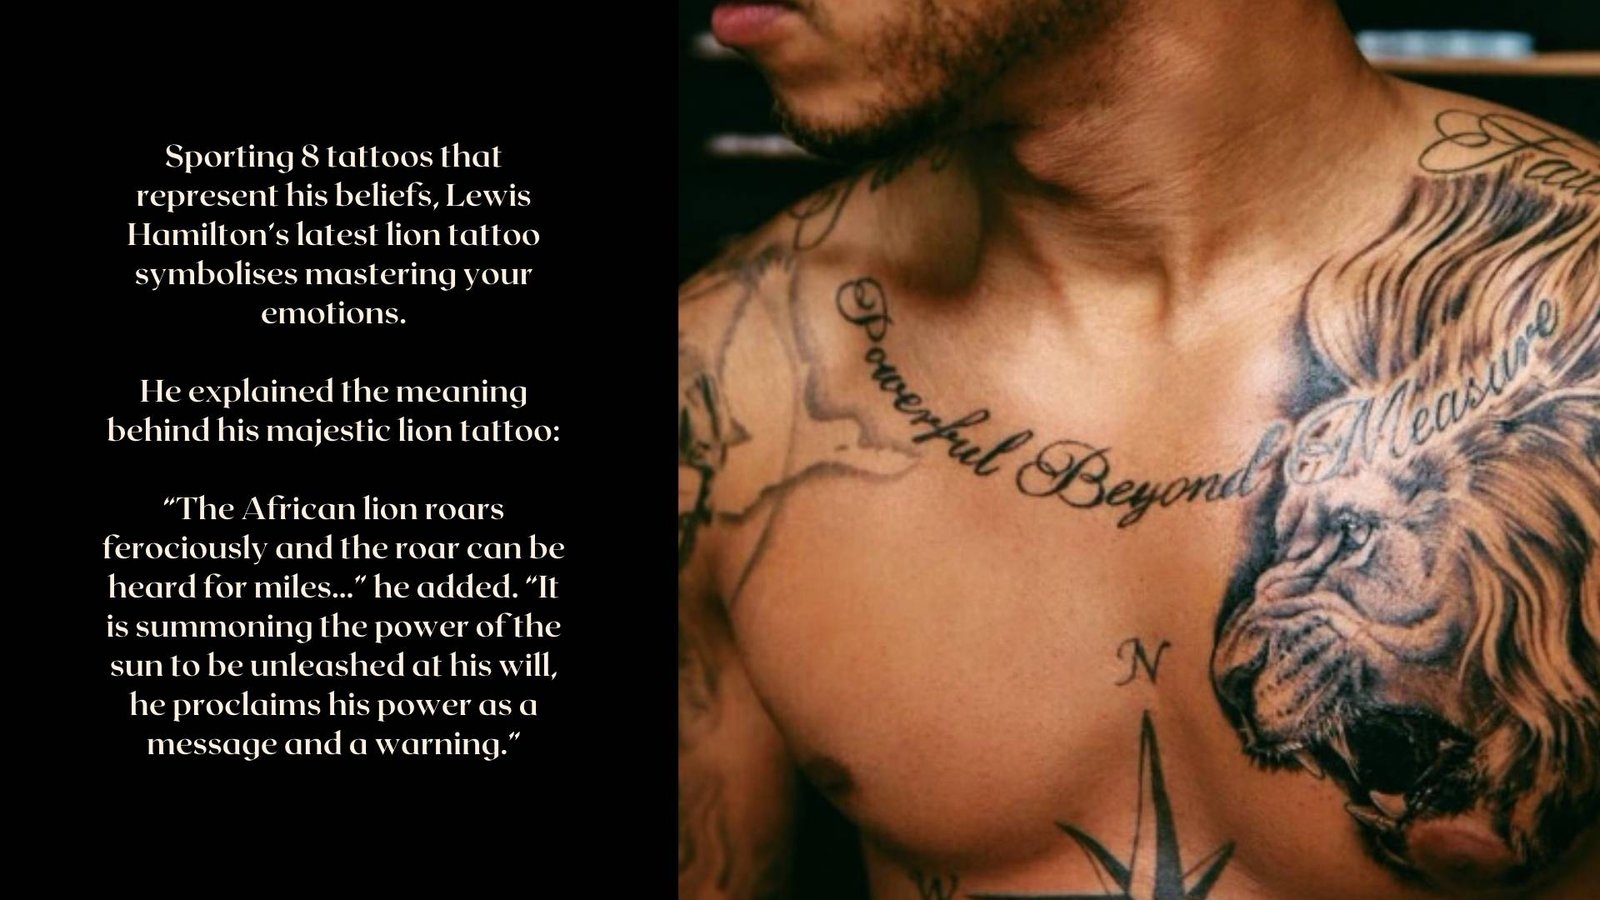 Lewis Hamilton’s Tattoos & Their Meanings